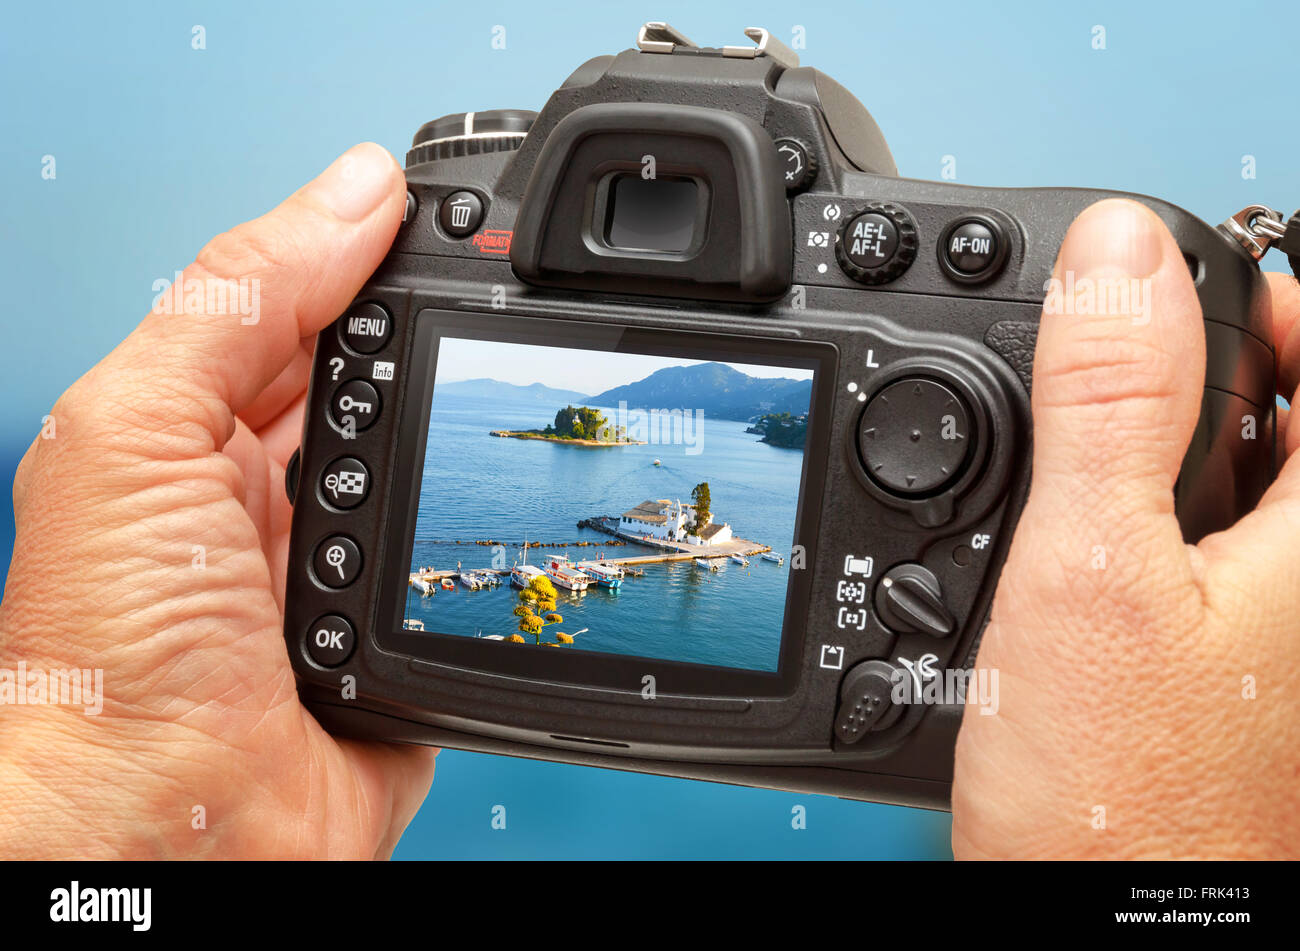 Photo of church and sea on camera display during the summer vacation. Travel photography Stock Photo